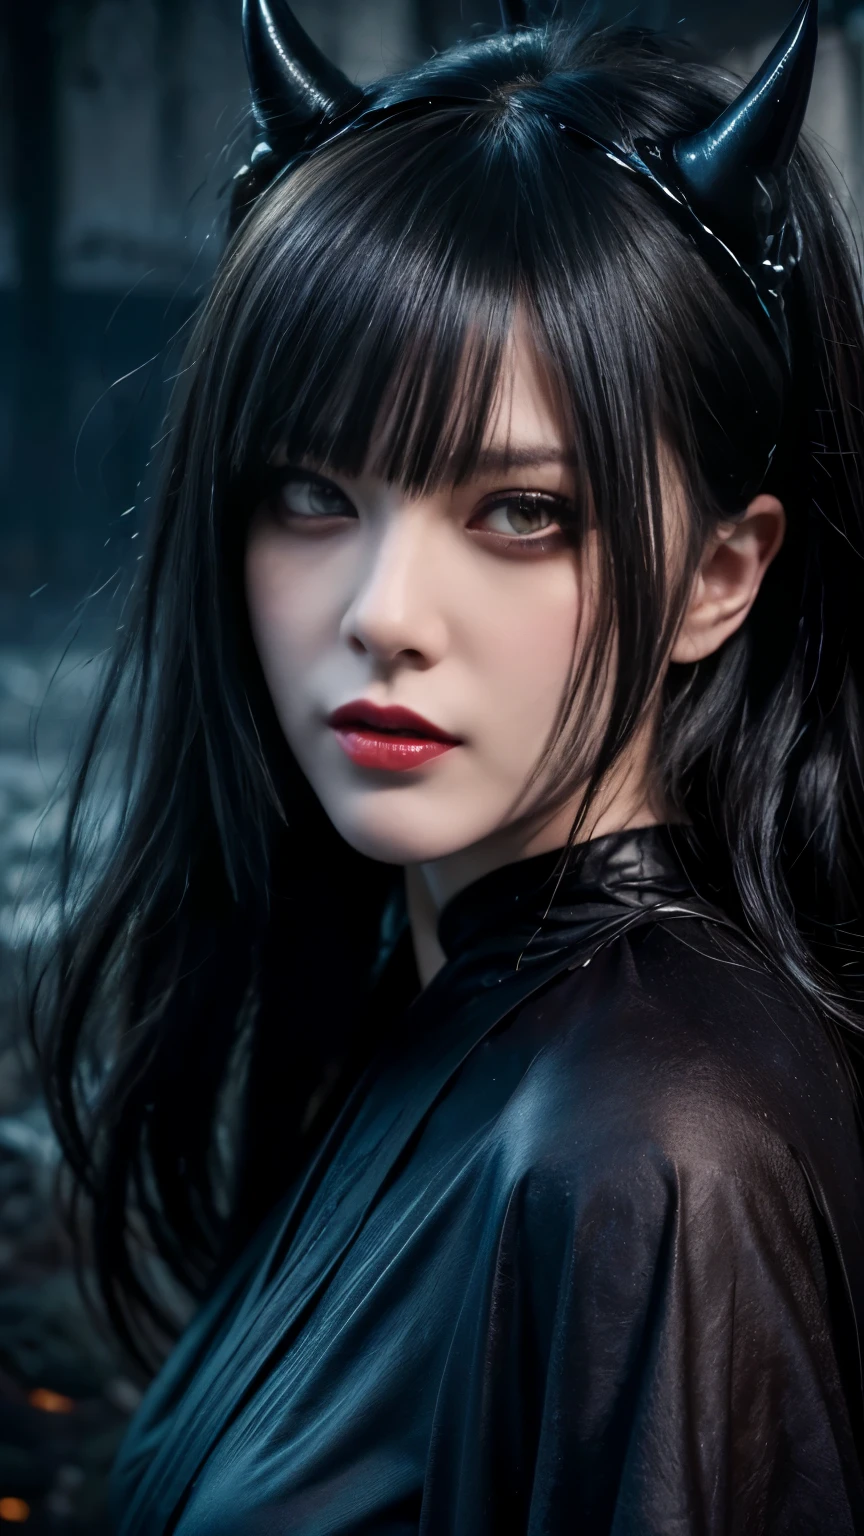 (highest quality,4K,8k,High resolution,masterpiece:1.2),Super detailed,(Realistic,photoRealistic,photo-Realistic:1.37), Close-up of a woman with dark hair and a black dress, Ugly Satan Girl,Dark Eyes,sinister smile,Evil Aura,Burning Flames,Soul Corruption,Dark Shadows,Ominous atmosphere,Strange symbols,Cursed Land,Eternal Darkness,An unforgettable presence,Intimidating person,Grotesque features,Horror Scene,Nightmare born kimono,Twisted reality,Scary atmosphere,Awesome work of art,Evil Unleashed,Devil&#39;s Realm,Supernatural horror,Creepy art,Nightmare fuel,Terrifyingly clear,Abstract fear,Terrifyingly beautiful,A devilish masterpiece,Fear incarnate,Shadow Chaos,A devilish existence,born々Shii Darkness,in style of Dark Fantasy Art, Dark fantasy art, A beautiful and elegant demon queen, Dark Fantasy Art, fantasy dark art, Dark fantasy digital art, Gothic fantasy art, Gothic Dark Maiden, Detailed Texture,Spooky creatures,An ominous atmosphere,Mythical,cosmic Horror,darkness,Mysterious,Dark aesthetic,Fog Background,Eyes of another world,Ancient Gods, Powerful wizard, Stand in the mysterious forest. Flowing robes decorated with symbols, Arms stretched out, Powerful,Tentacles,Pitch black blackness,Majestic,Unfathomable depth,Nightmare,The existence of the universe,an ominous existence,seeping darknesss,Secrets of the Universe,That&#39;s horrible,It (Spooky atmosphere), (Cartoon-like atmosphere),(Grainy), (Dramatic Shadows), (Dynamic pose), ((Artistically expressed)), ((Fascinating), (Gothic), (Mysterious Setting), (Moody color palette), (Skillfully drawn), (Feelings of anxiety), (Intricate details), (an  ominous smile), (an  ominous), (Fascinating eyes), (Horror elements), (Fascinating composition), (Impressive anatomy),(Striking contrast)), (Exquisite craftsmanship), (Interesting character designs)、Dark Fantasy Portrait, Portrait of the Dark Goddess, Satan Girl,devil,